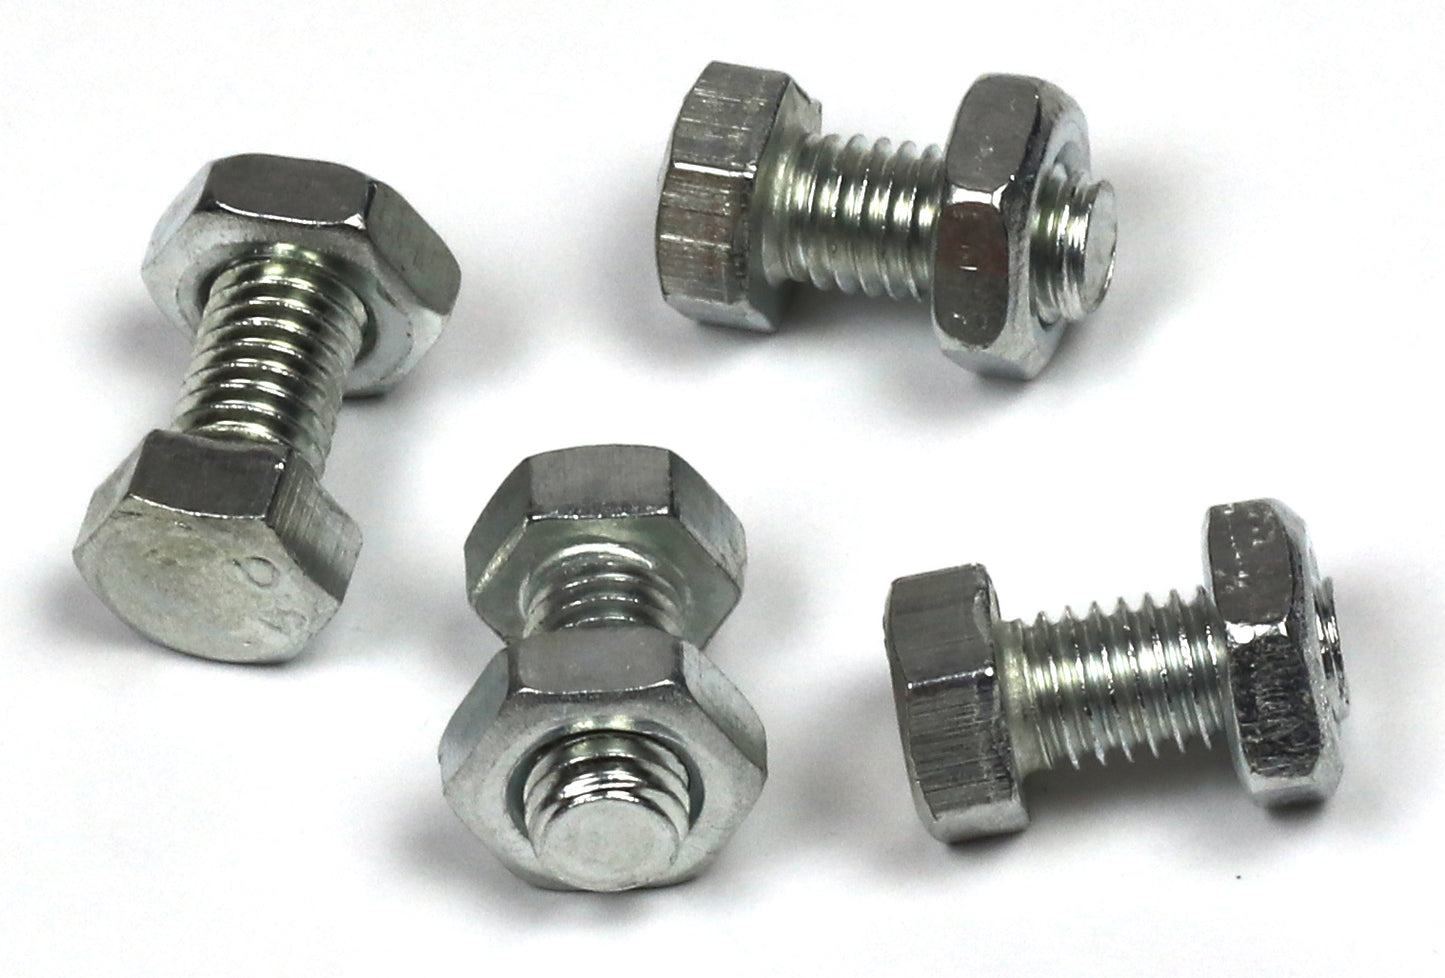 Step 'N Tilt Core Lawn Aerator Version 3 (Replacement Part: Fasteners for Tines and Wheel Assemblies)